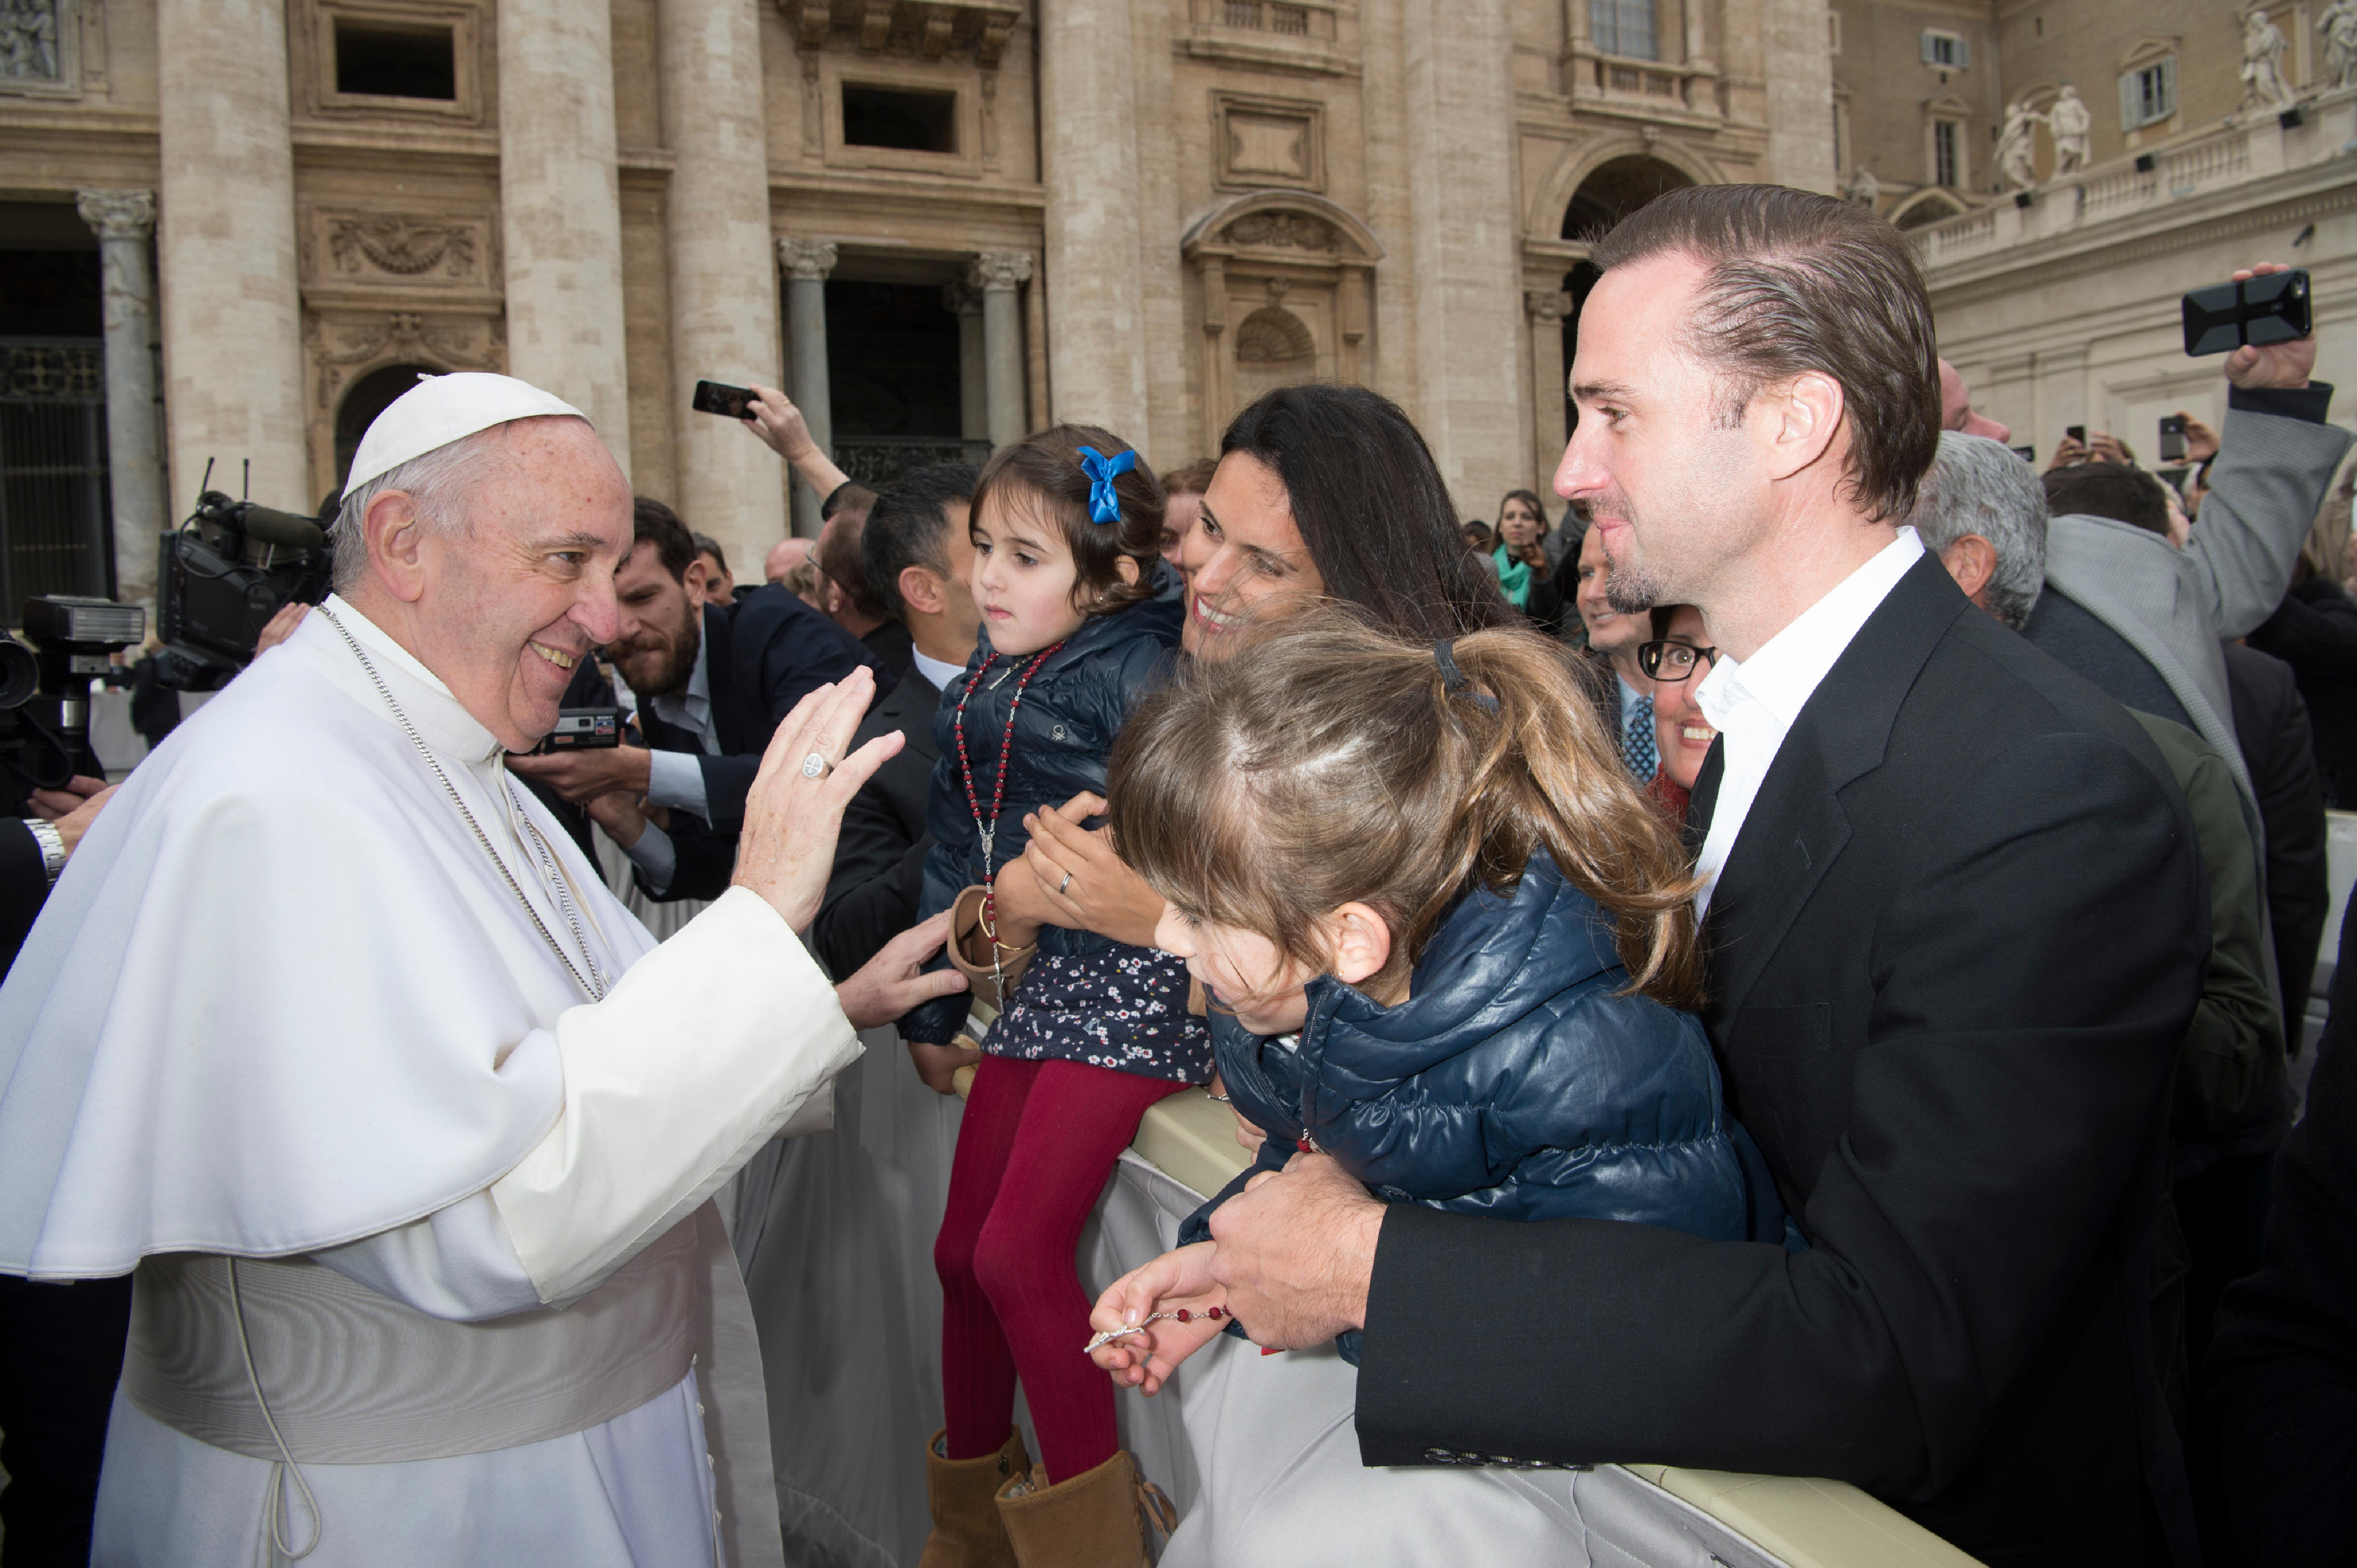 Joseph Fiennes, right, and his wife Maria Dolores Dieguez hold their two daughters as they greet Pope Francis at the Vatican on Feb. 3, 2016.